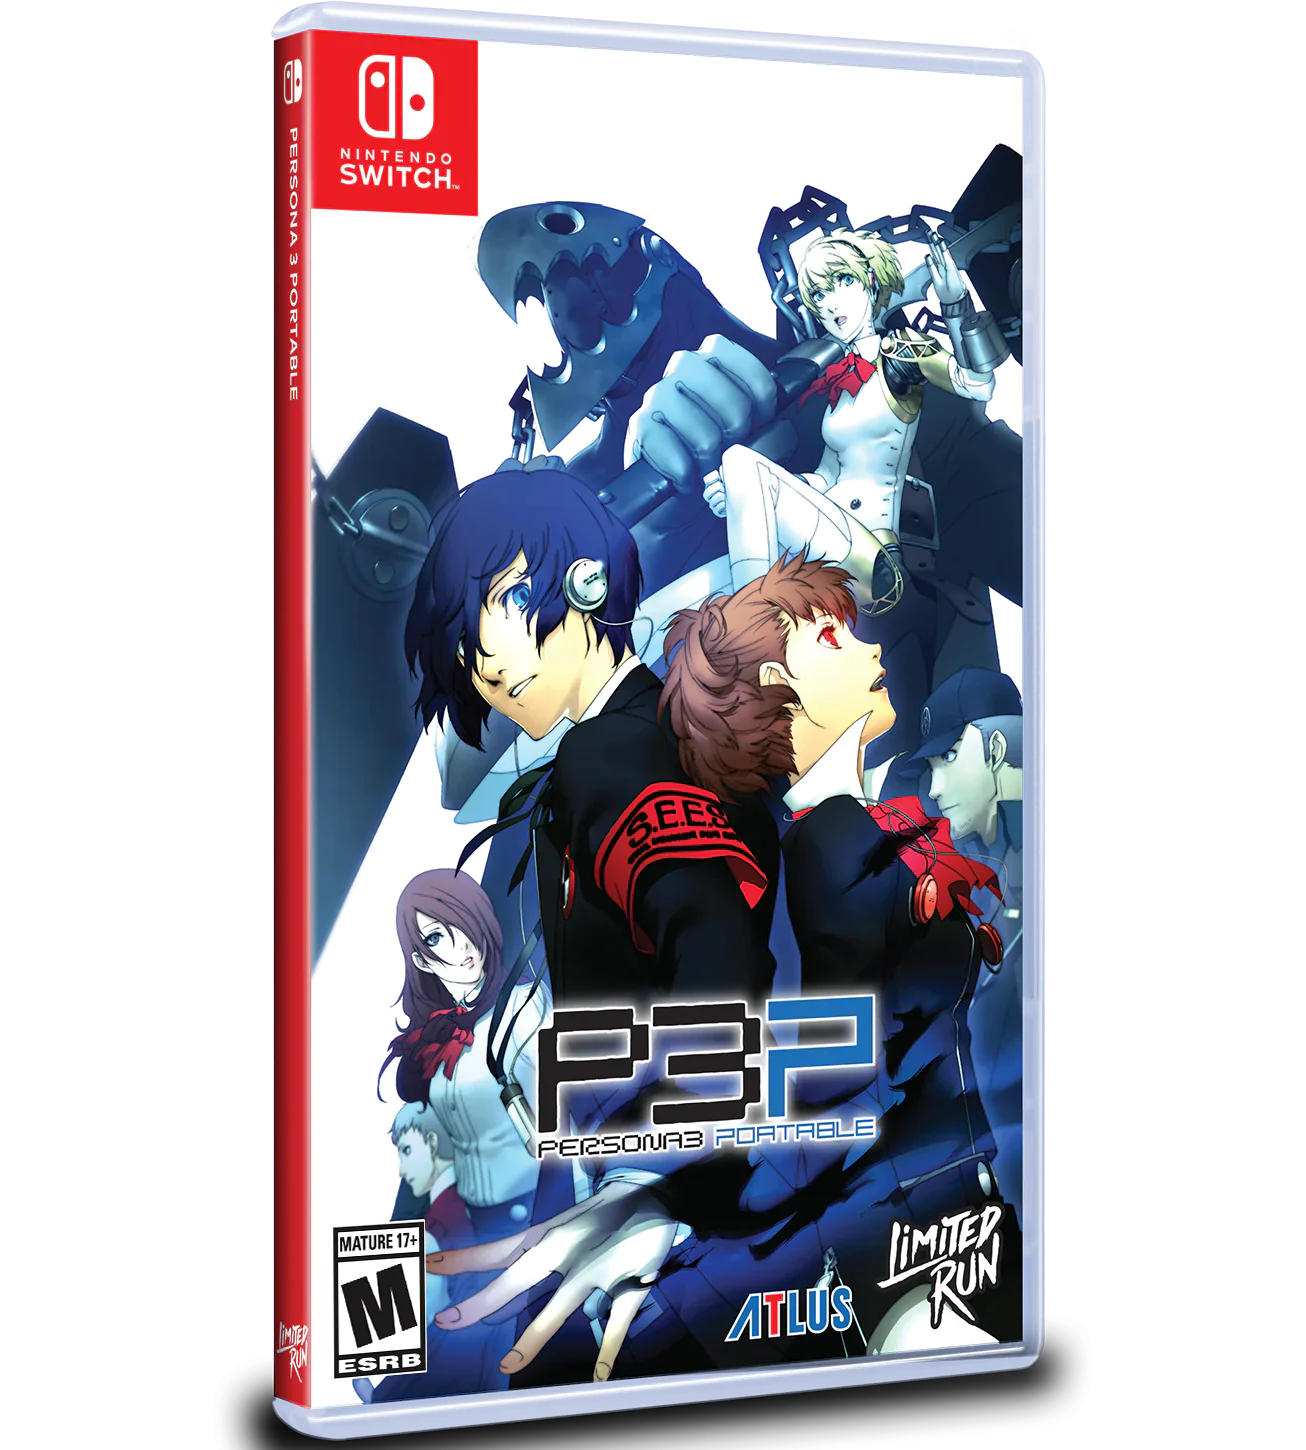 Persona 3 Portable [LIMITED RUN GAMES #213] - Nintendo Switch